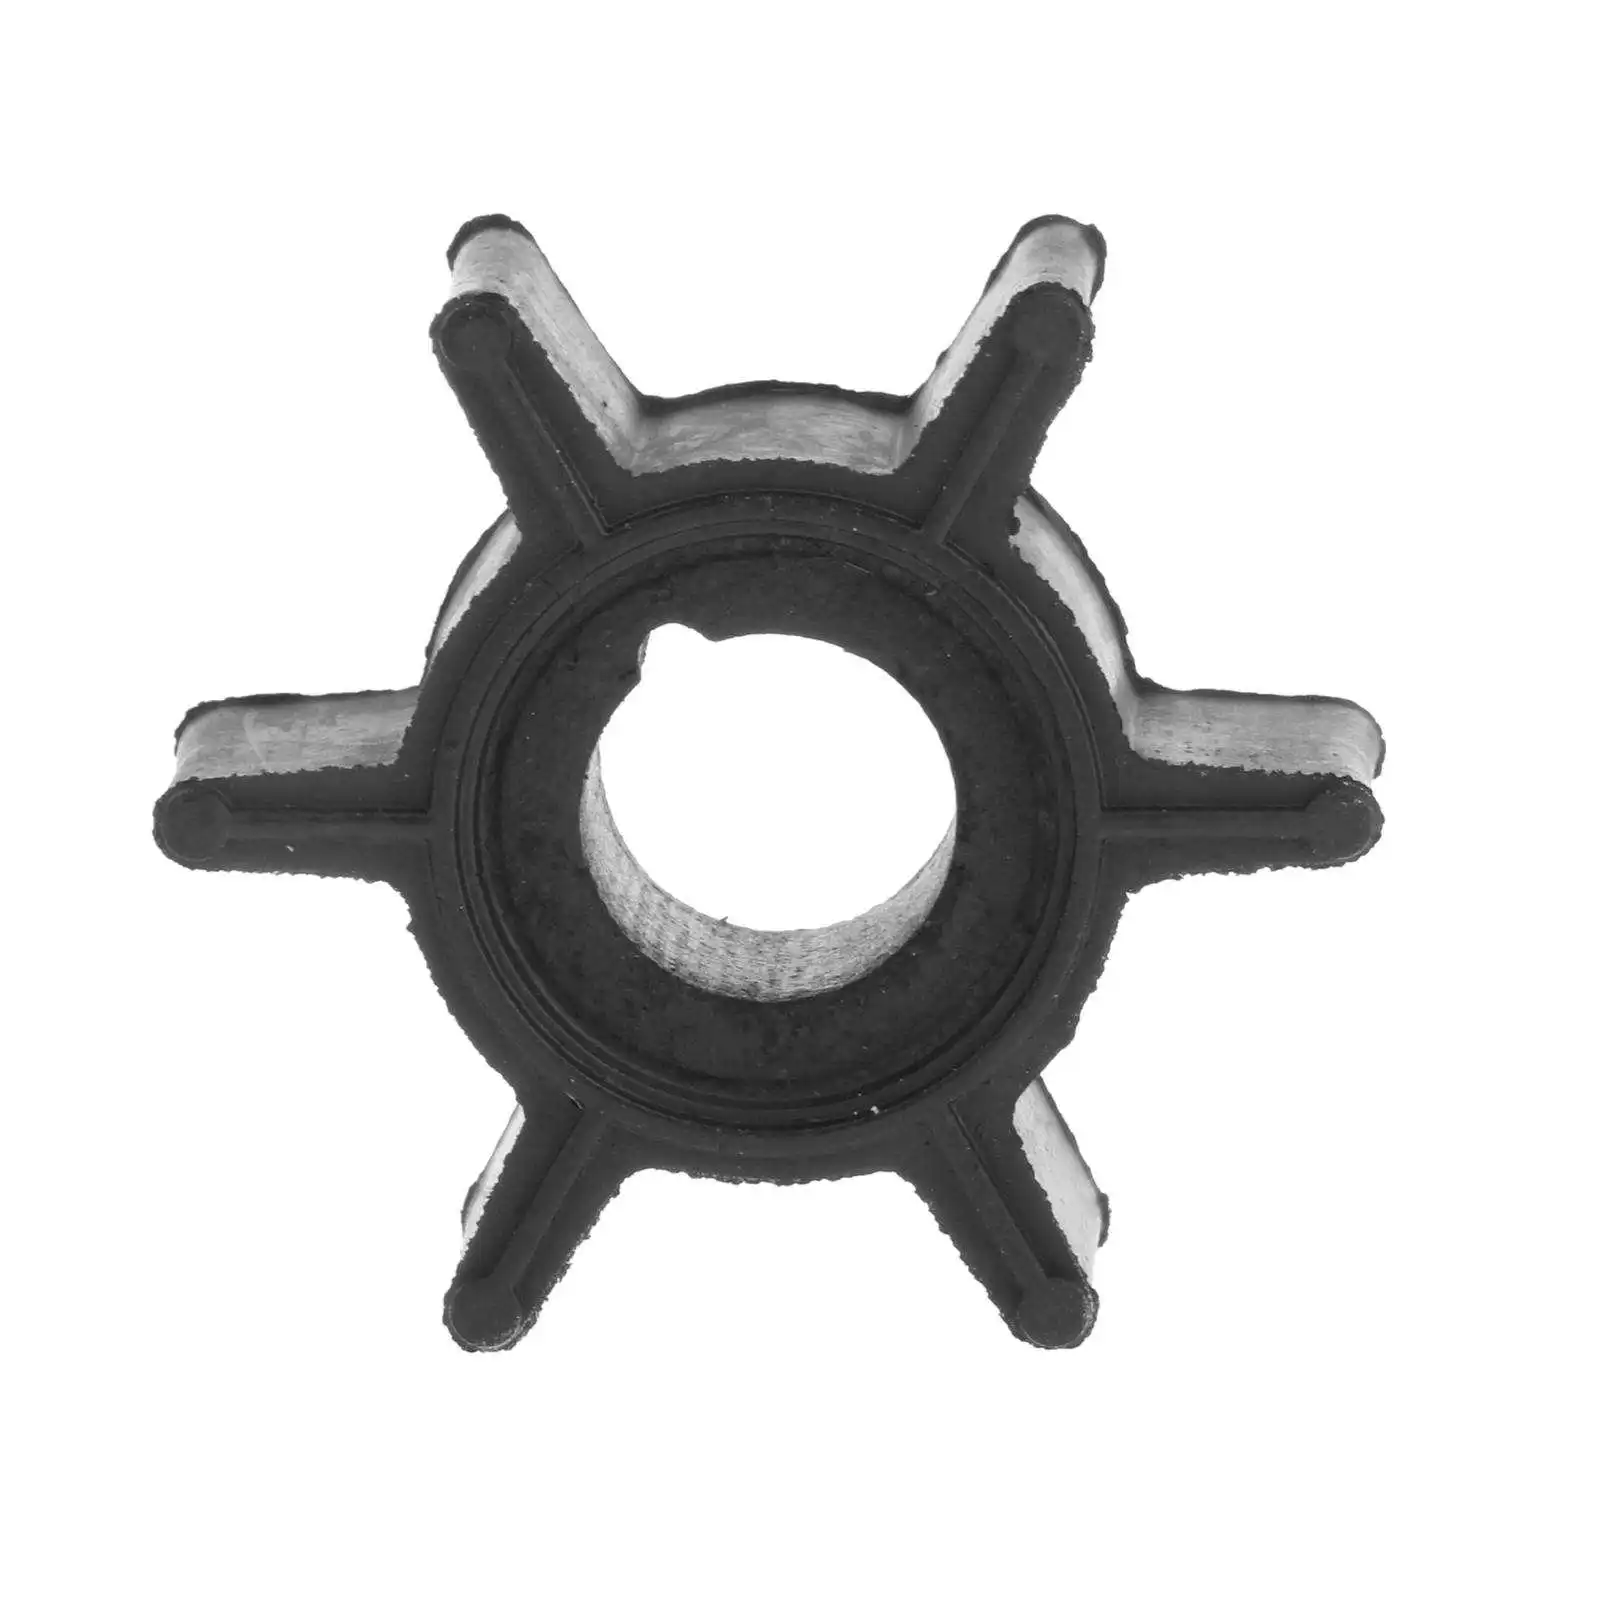 Water Pump Impeller 369-65021-1 47-16154-3 for Mercury   Tohatsu 2HP 2.5HP 3.5HP 4HP 5HP 6HP 2 /  Outboard Engine